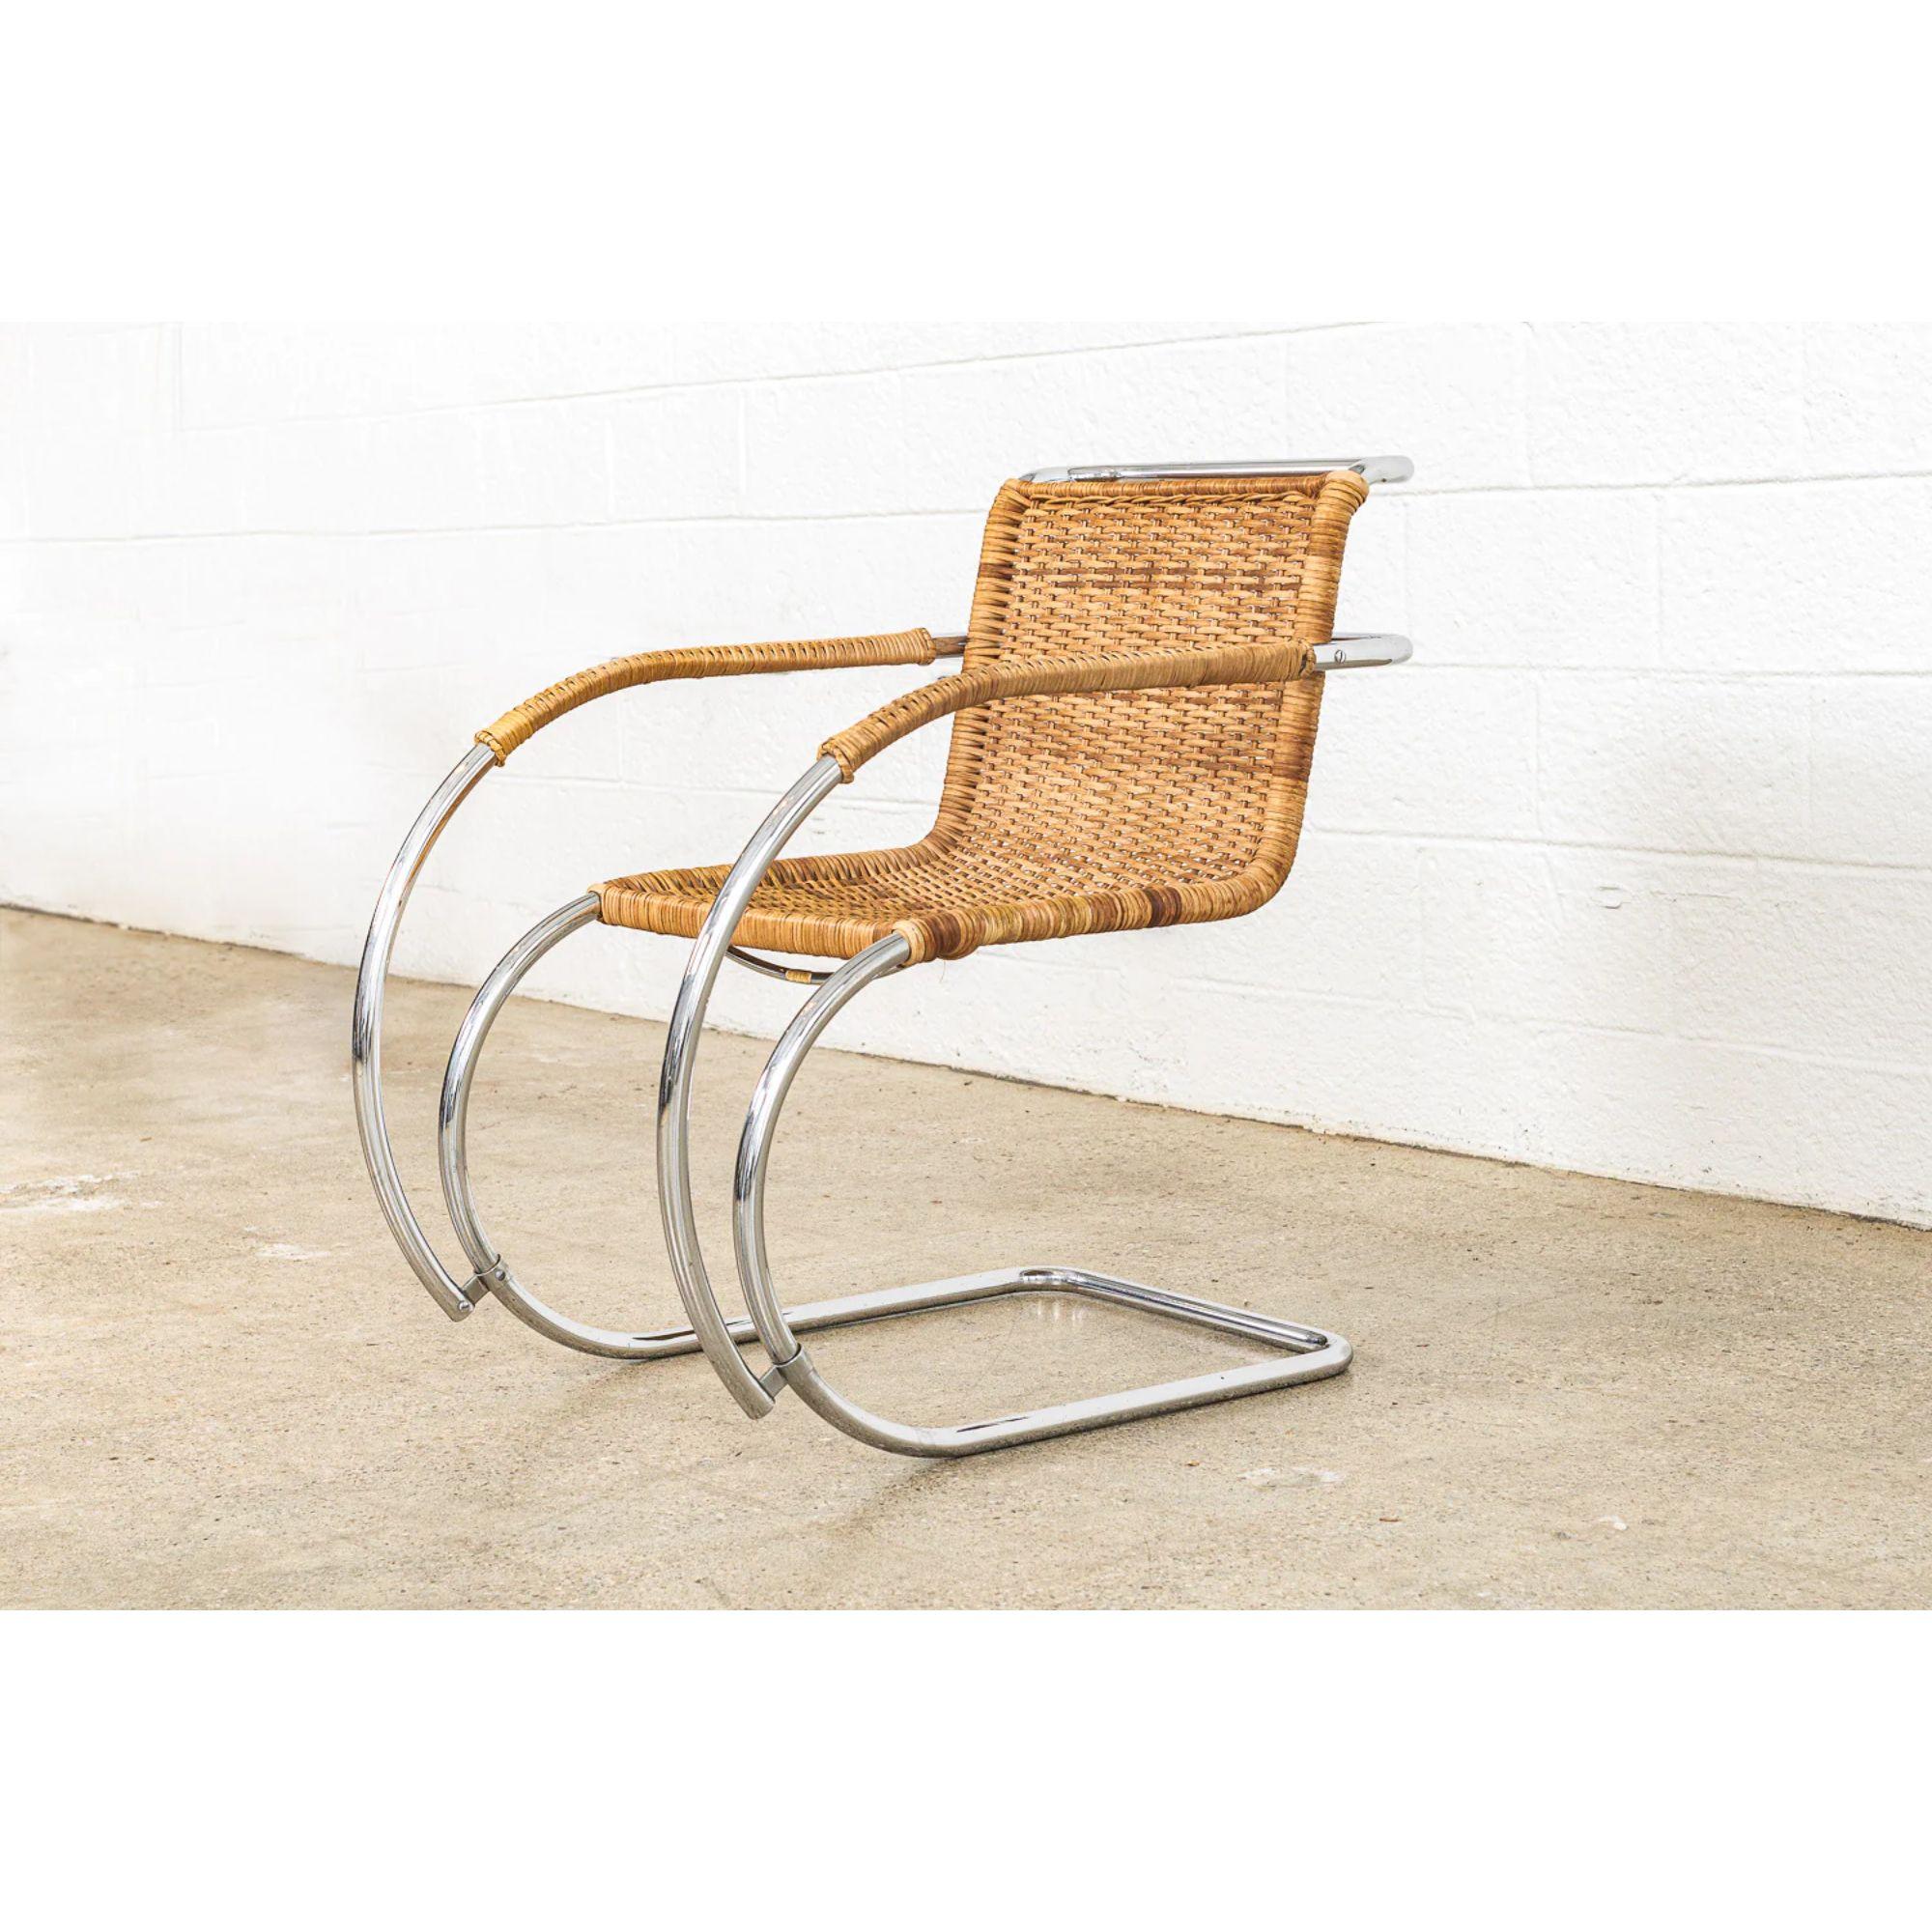 This vintage Mies van der Rohe MR 20 cantilevered cane arm chair made by Stendig is circa 1970. The MR chair was designed by modernist architect Ludwig Mies van der Rohe in 1927 as part of his contribution to the Weissenhof exhibit in Stuttgart,